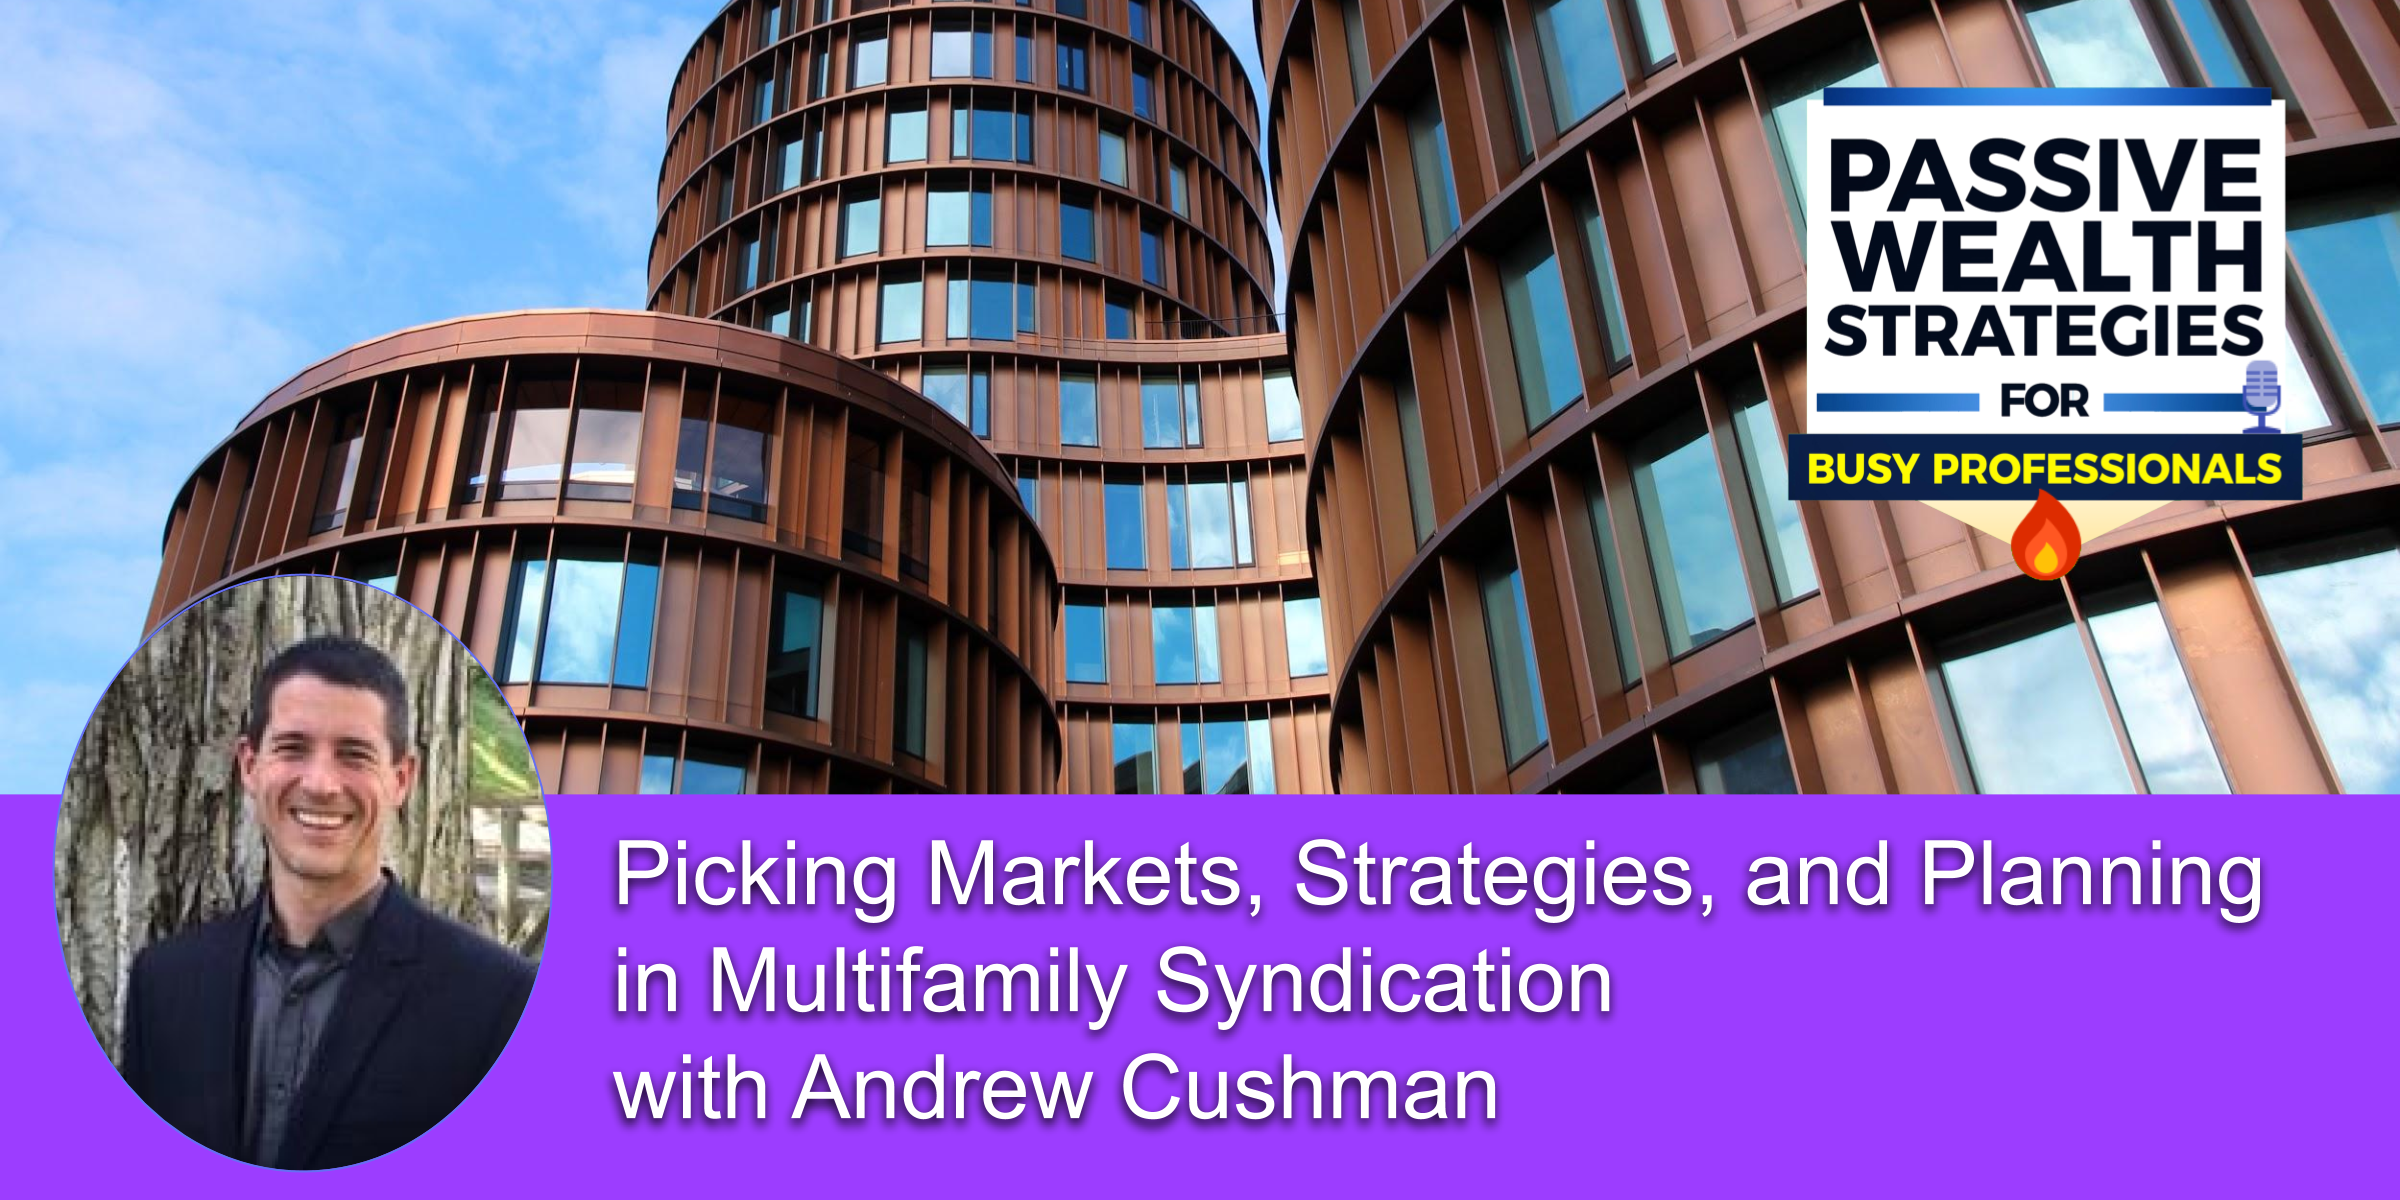 Picking Markets Strategies and Planning in Multifamily Syndication with Andrew Cushman 1